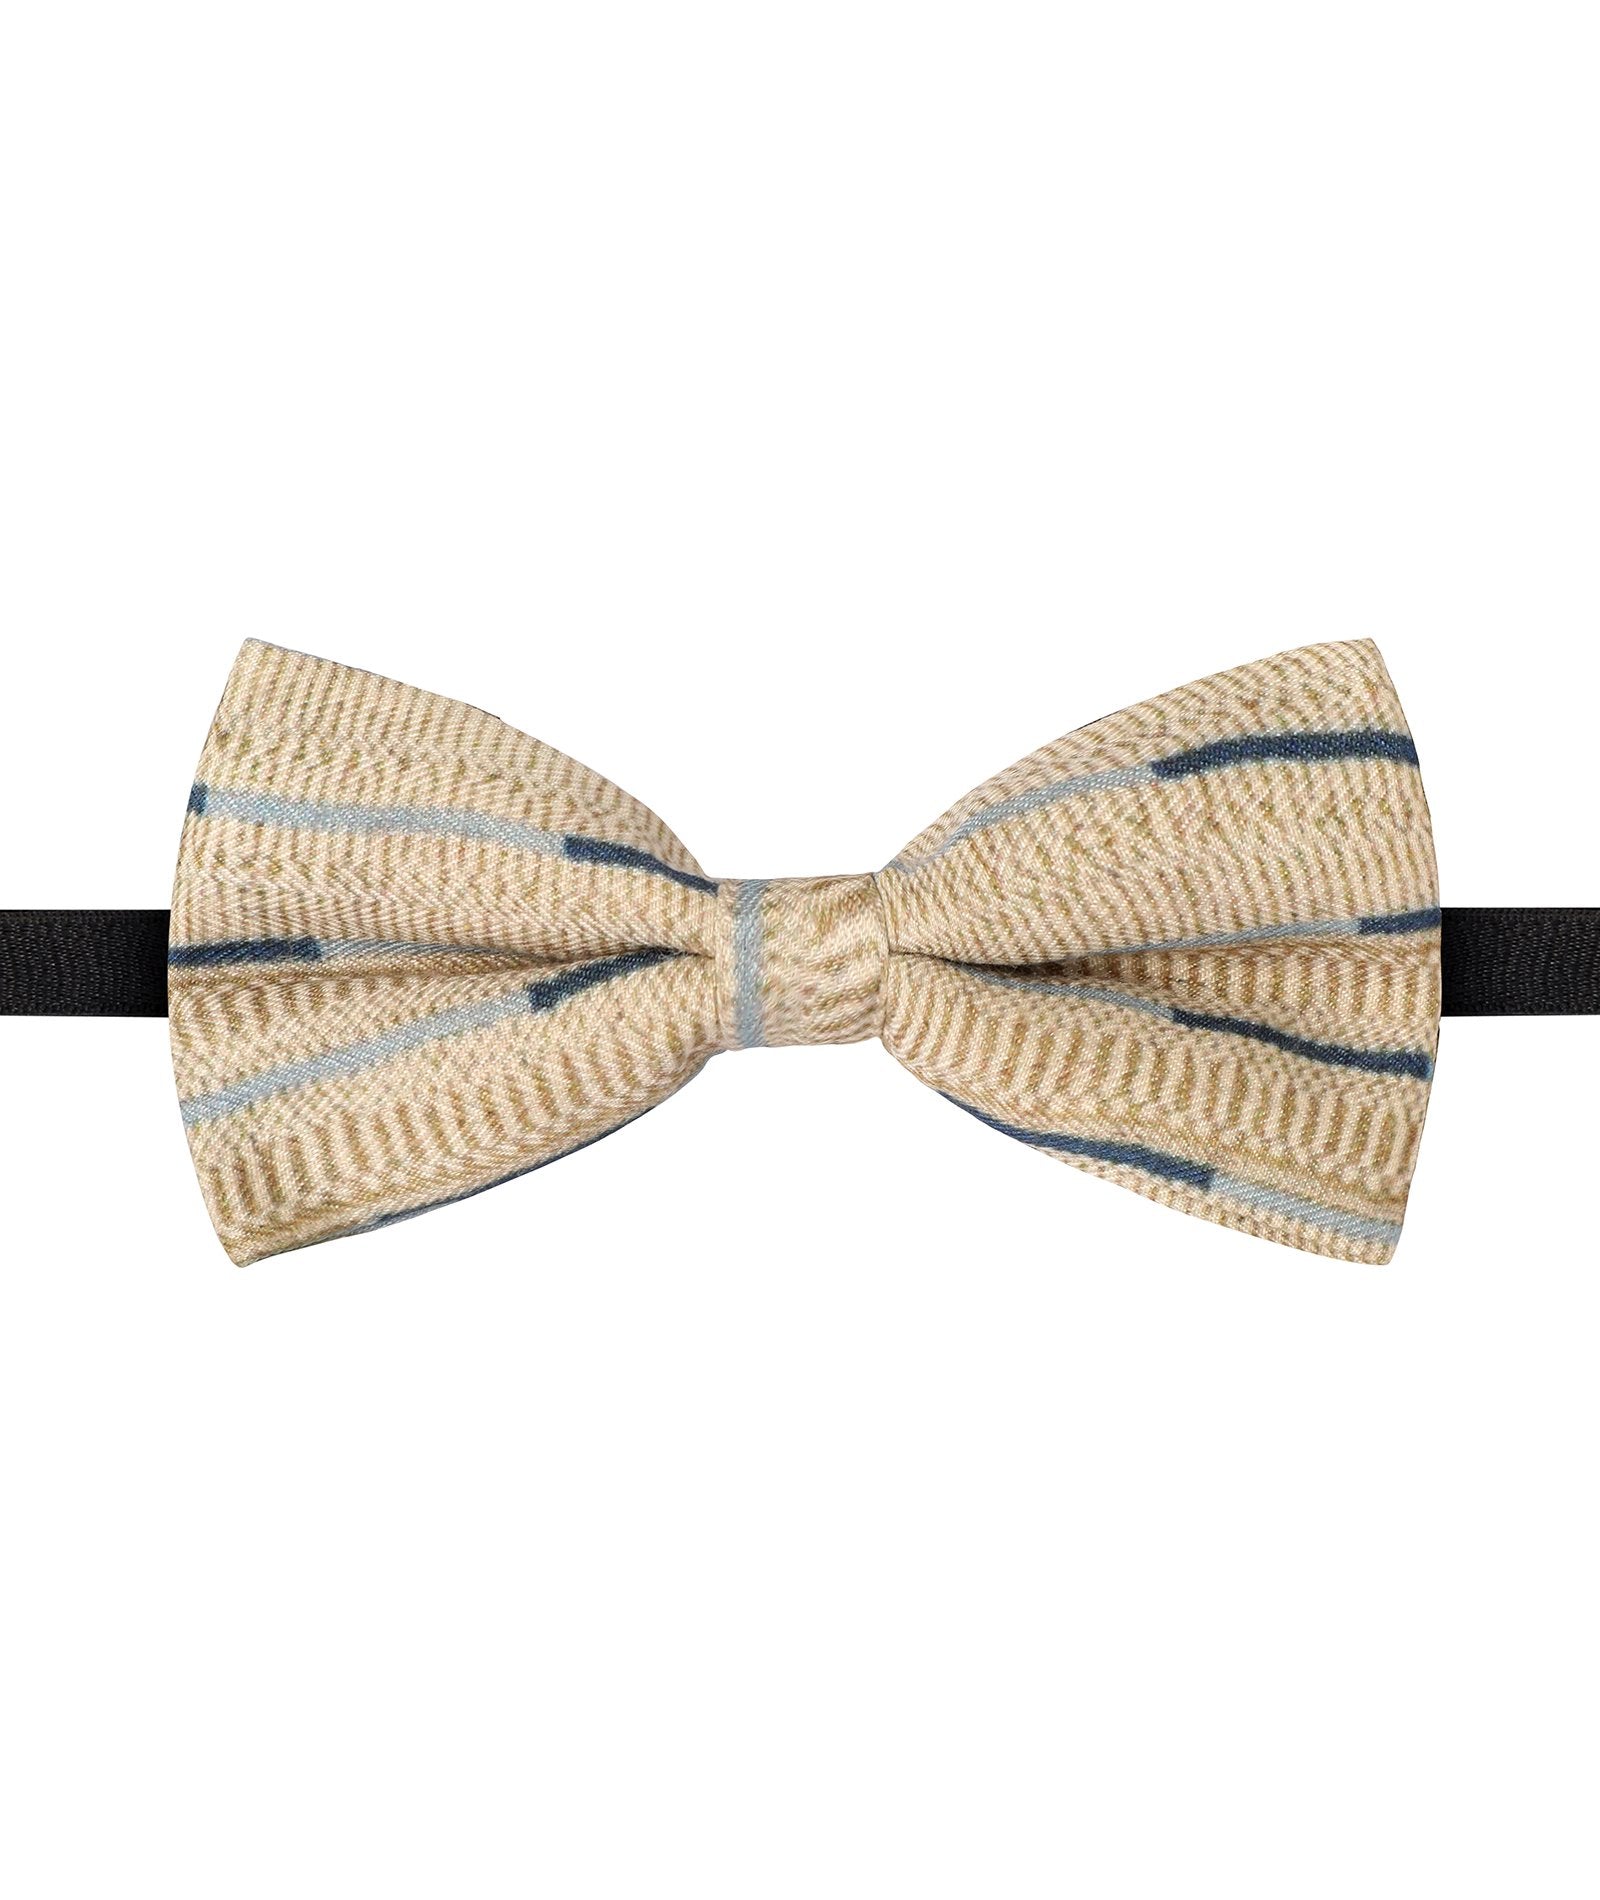 Cream and Blue Printed Bow Tie